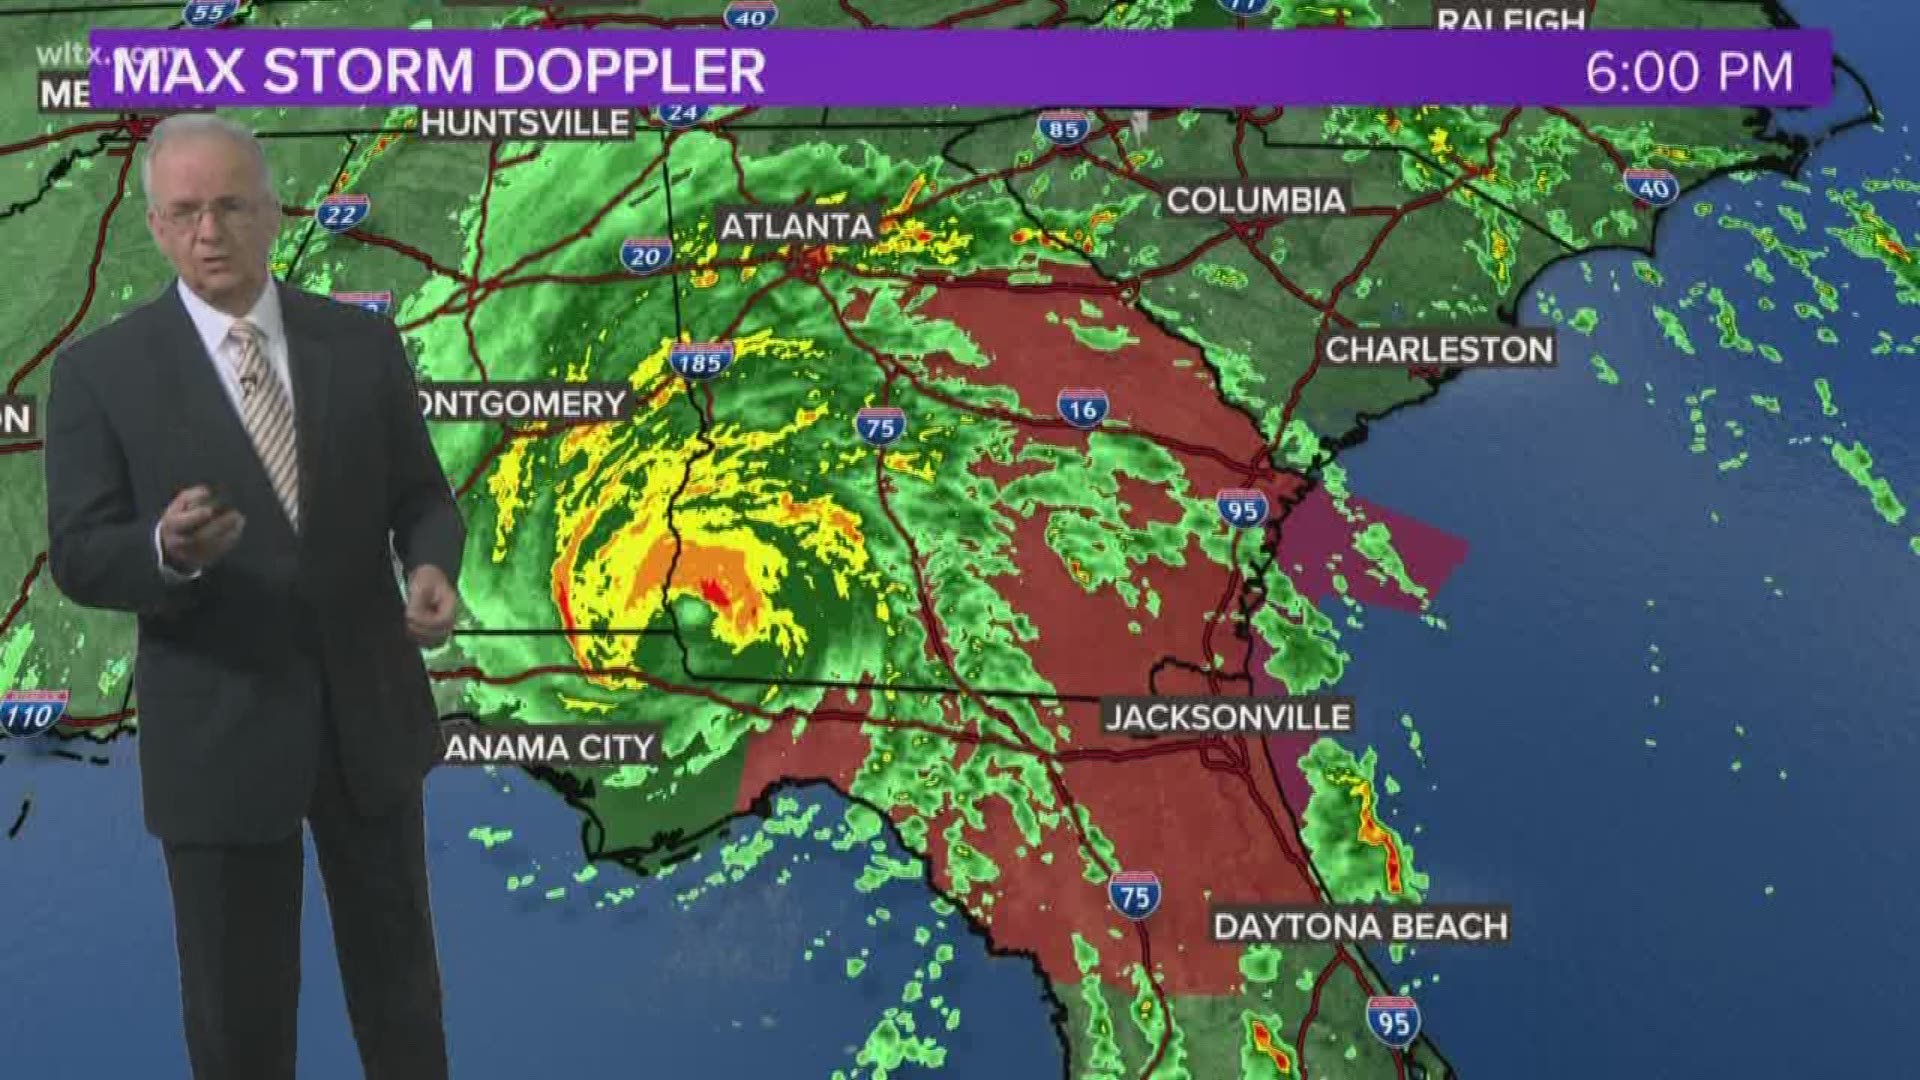 The storm has lost some of its strength as it moves into Georgia on a path into South Carolina.